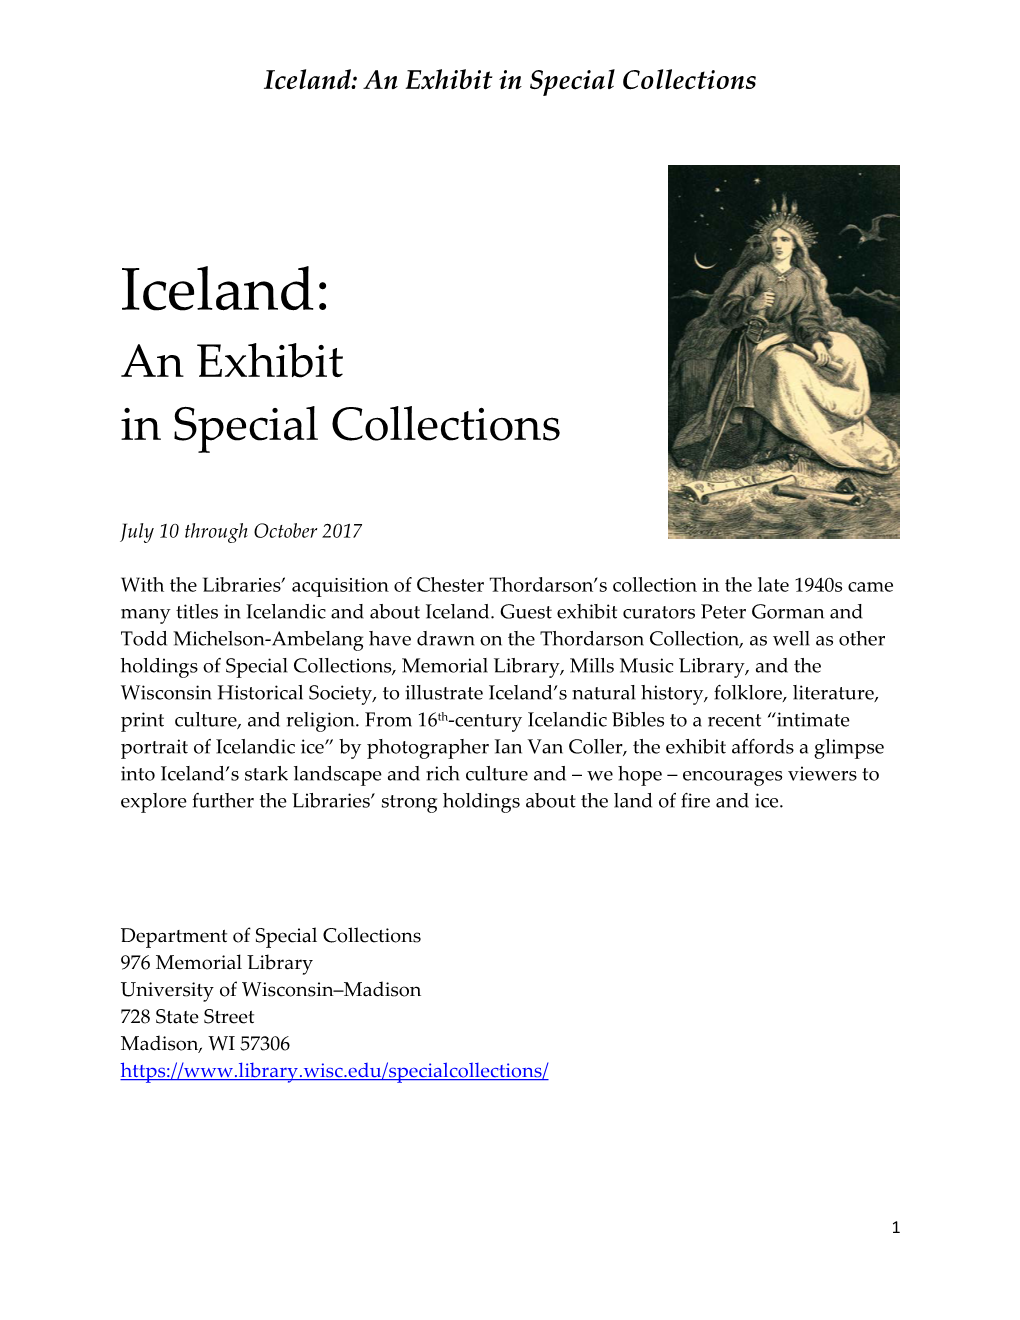 Iceland: an Exhibit in Special Collections